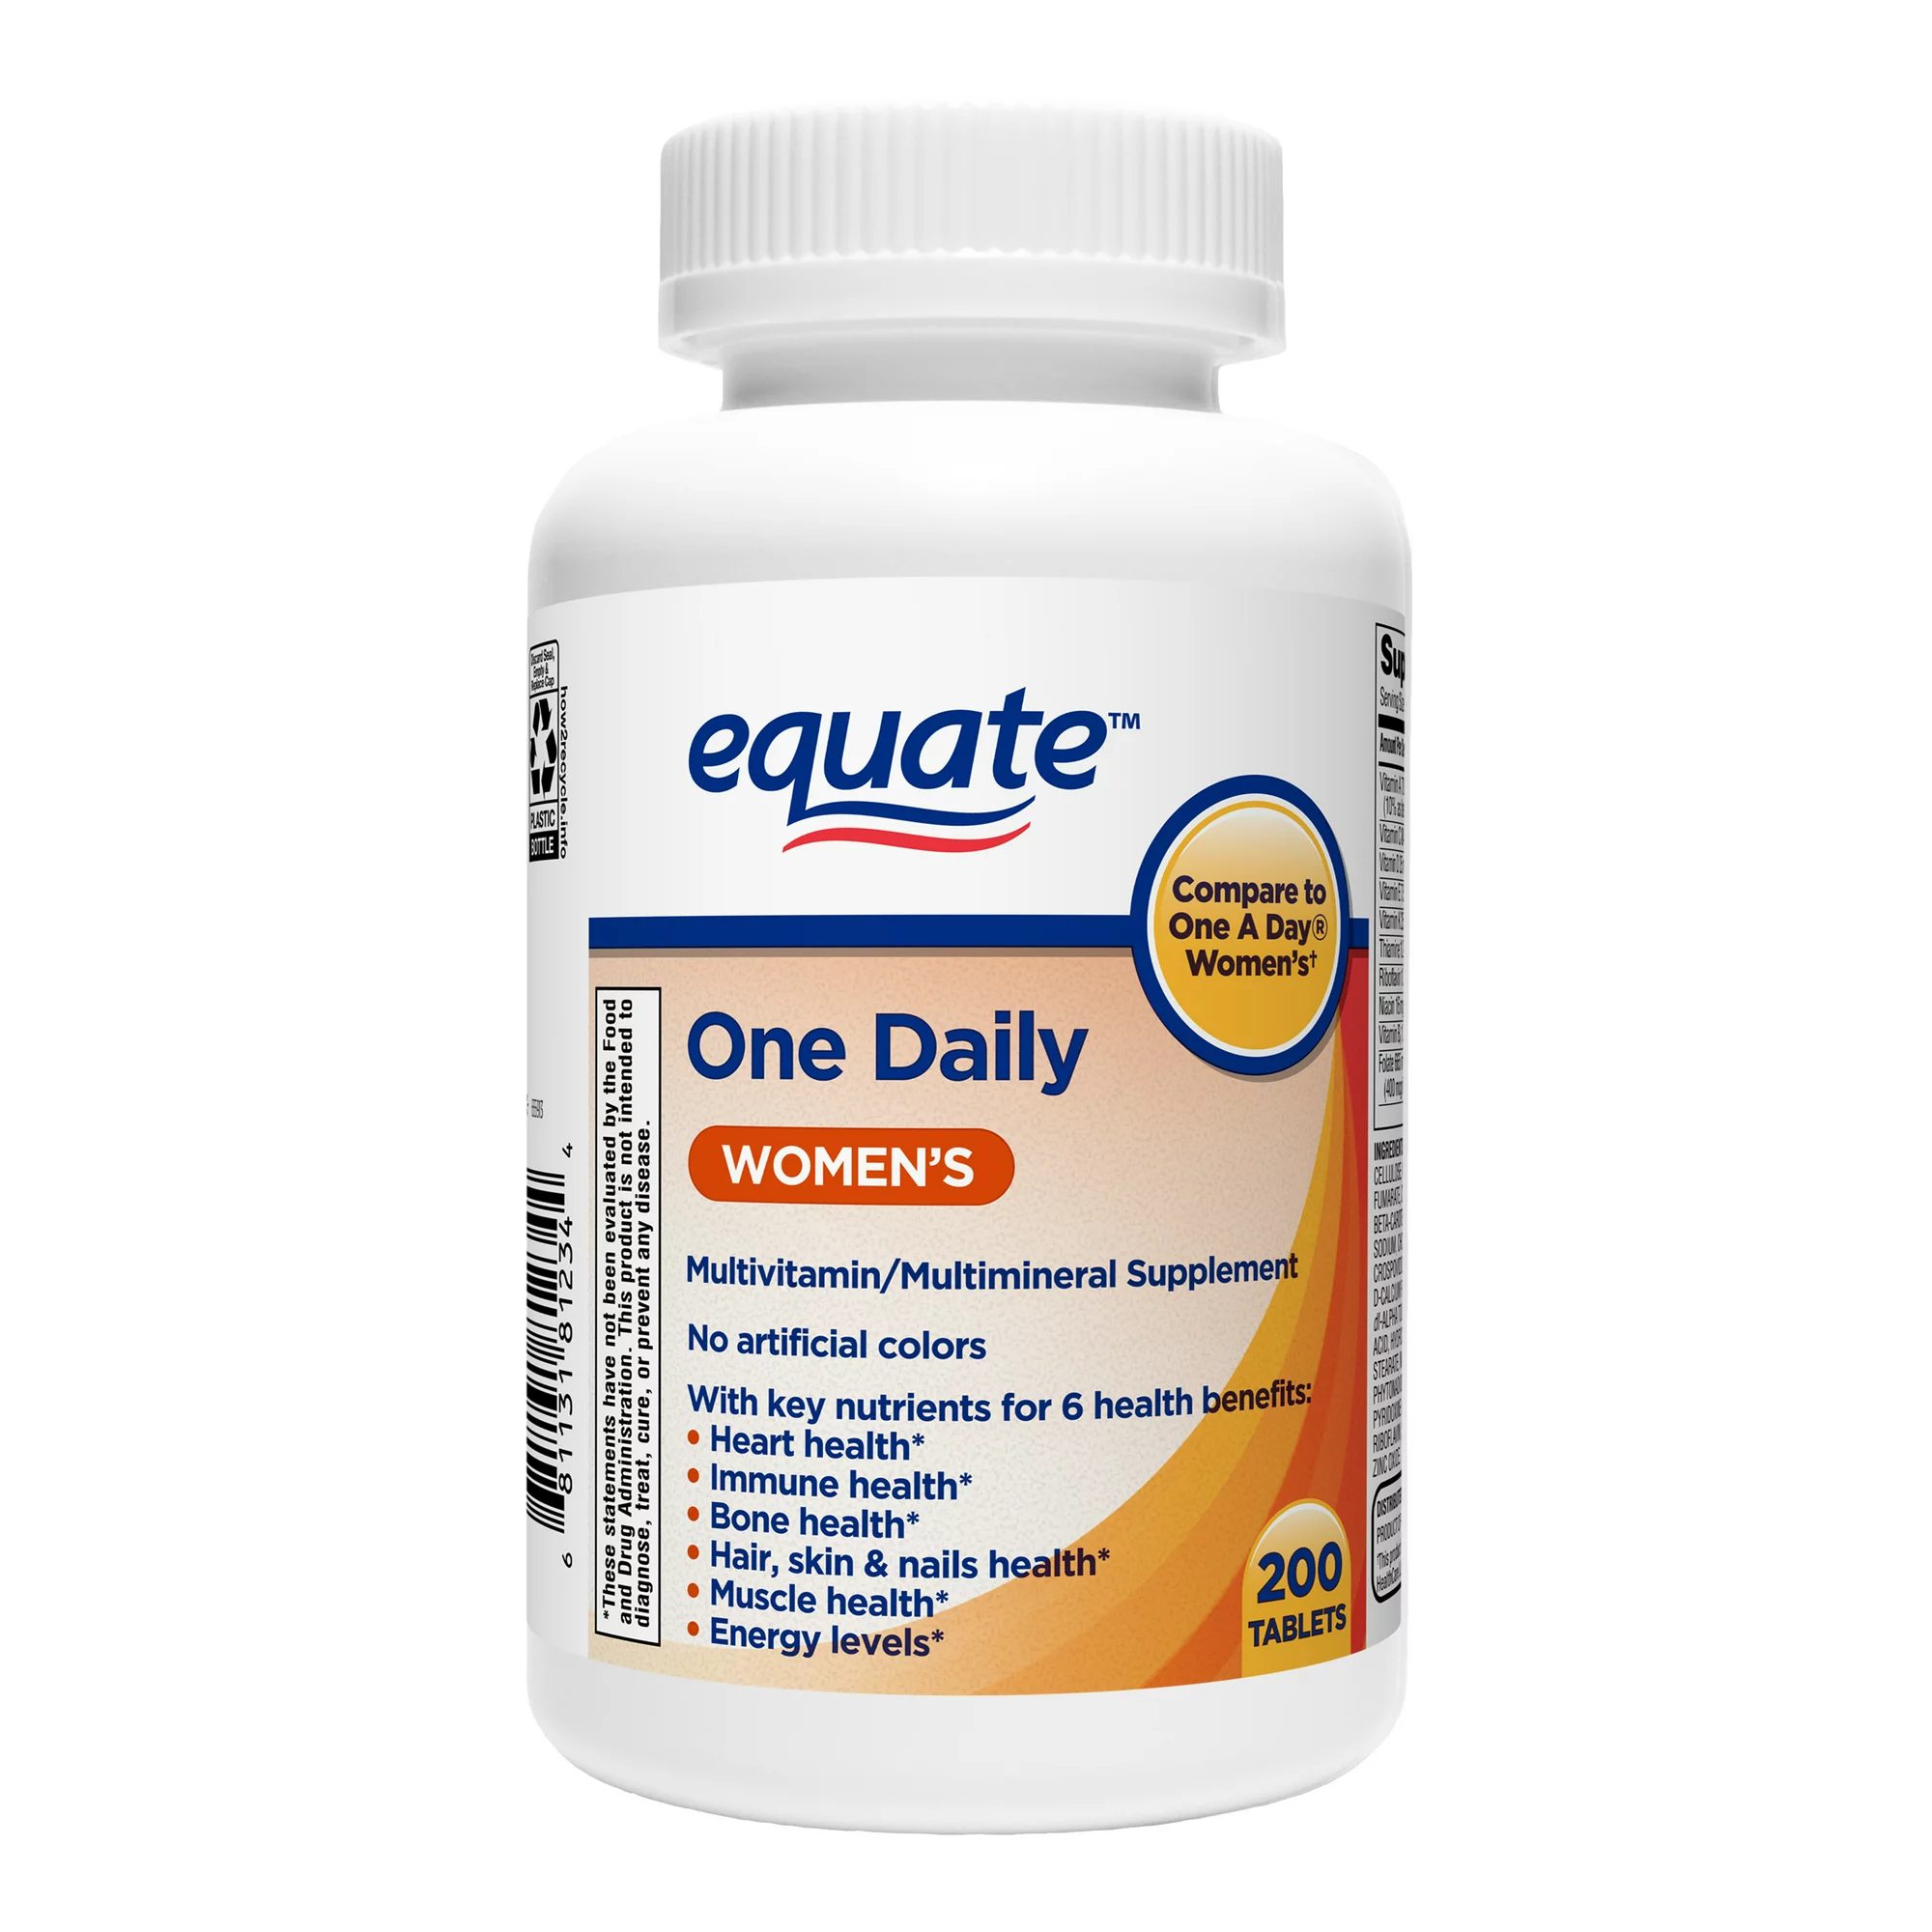 Equate - Women's One Daily Multivitamin, Support Heart, Immune, and Bone Health - 200 Tablets